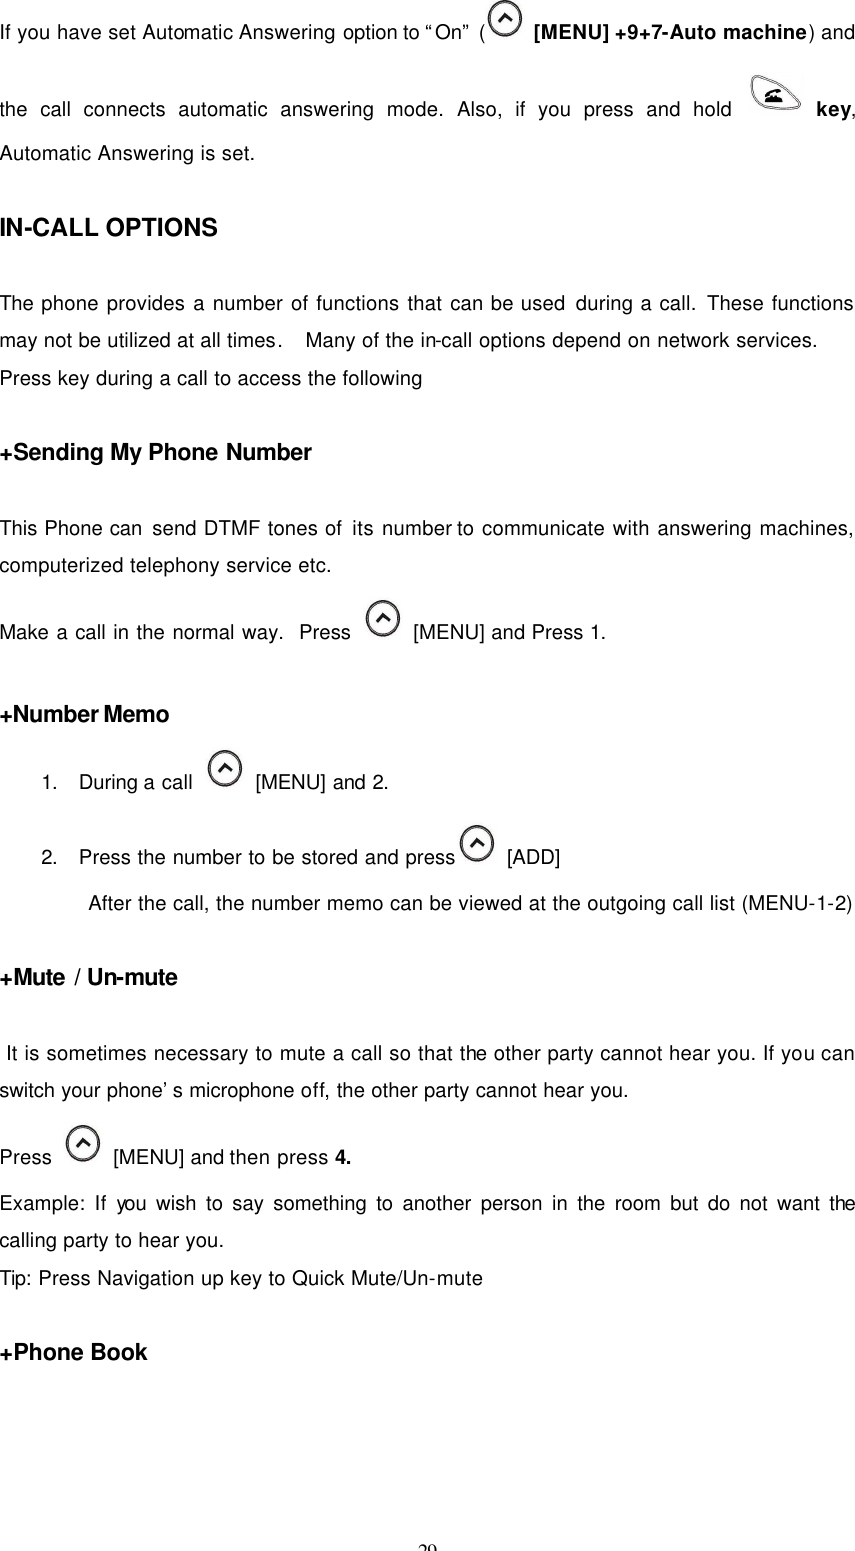 29  If you have set Automatic Answering option to “On” (  [MENU] +9+7-Auto machine) and the call connects automatic answering mode. Also, if you press and hold  key, Automatic Answering is set.    IN-CALL OPTIONS  The phone provides a number of functions that can be used during a call. These functions may not be utilized at all times.   Many of the in-call options depend on network services. Press key during a call to access the following  +Sending My Phone Number  This Phone can send DTMF tones of its number to communicate with answering machines, computerized telephony service etc.   Make a call in the normal way.  Press    [MENU] and Press 1.  +Number Memo 1. During a call    [MENU] and 2. 2. Press the number to be stored and press  [ADD] After the call, the number memo can be viewed at the outgoing call list (MENU-1-2)  +Mute / Un-mute   It is sometimes necessary to mute a call so that the other party cannot hear you. If you can switch your phone’s microphone off, the other party cannot hear you. Press    [MENU] and then press 4. Example: If you wish to say something to another person in the room but do not want the calling party to hear you. Tip: Press Navigation up key to Quick Mute/Un-mute  +Phone Book  